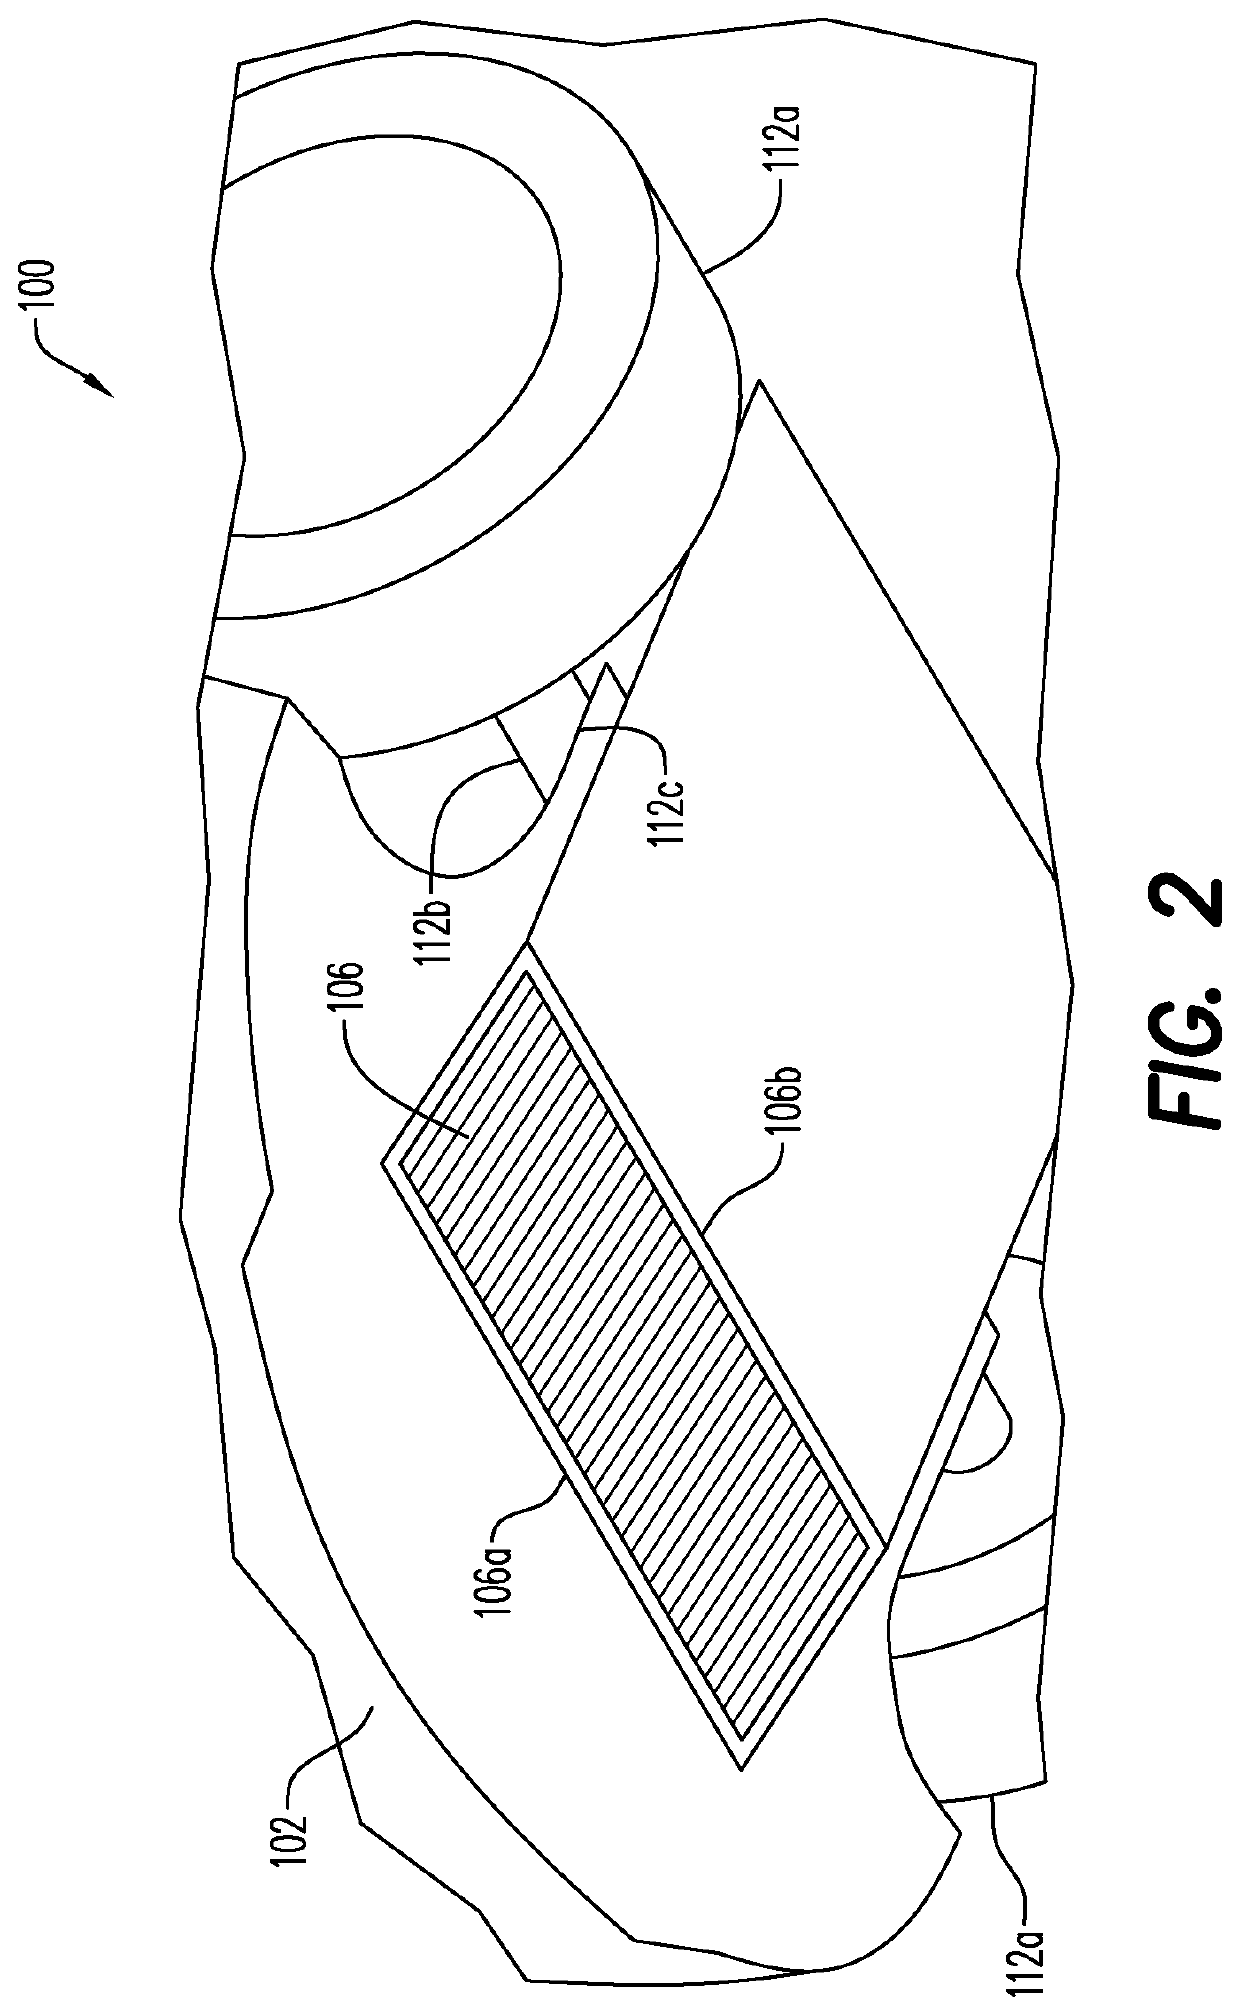 Heat transfer system for a vehicle